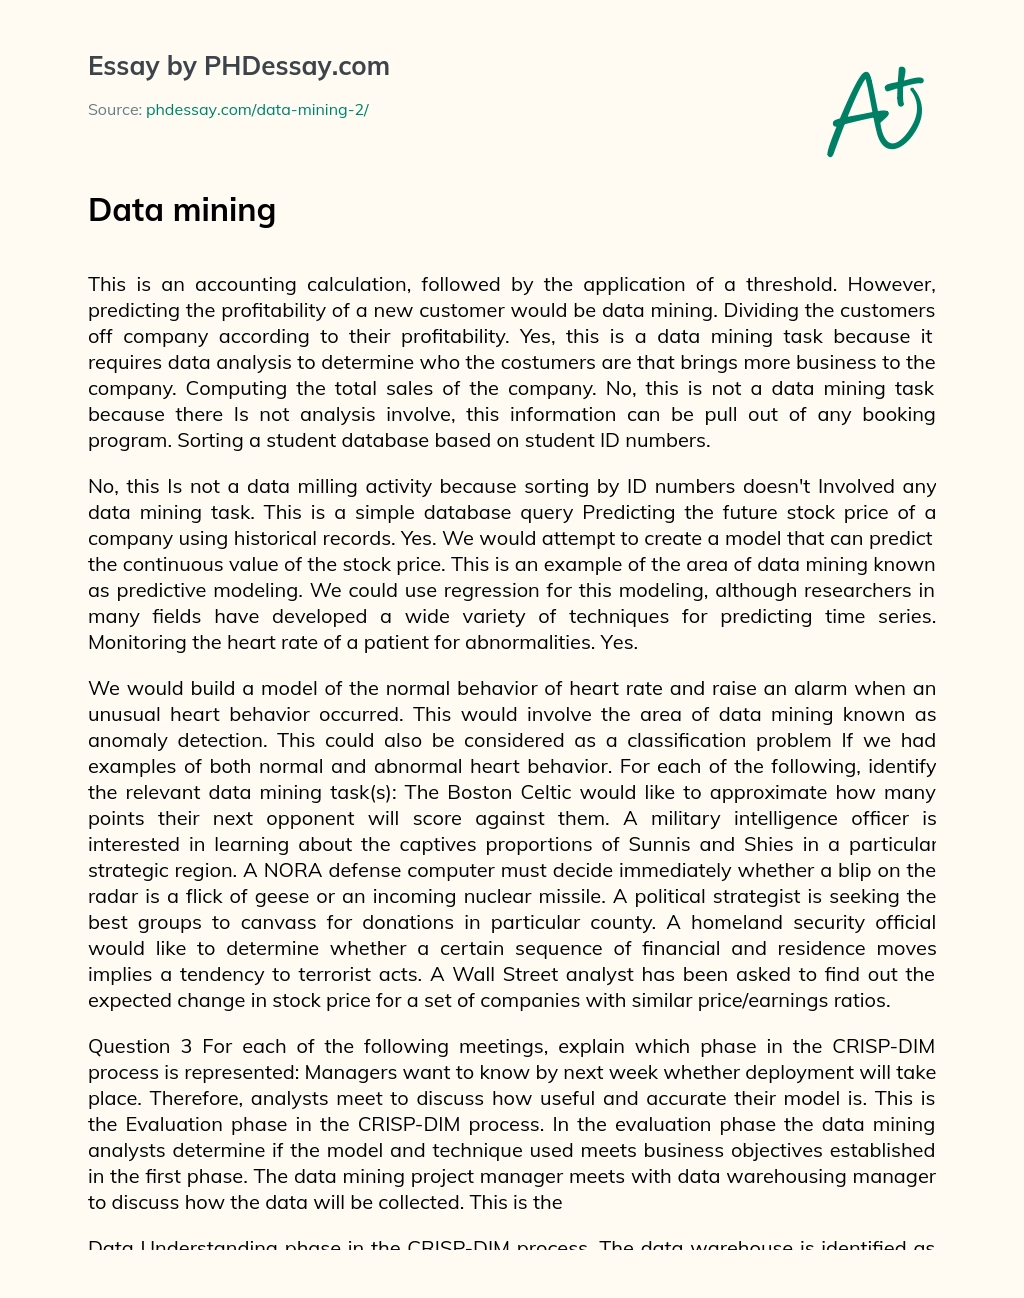 Data Mining and Health: Monitoring Heart Rate for Abnormalities essay